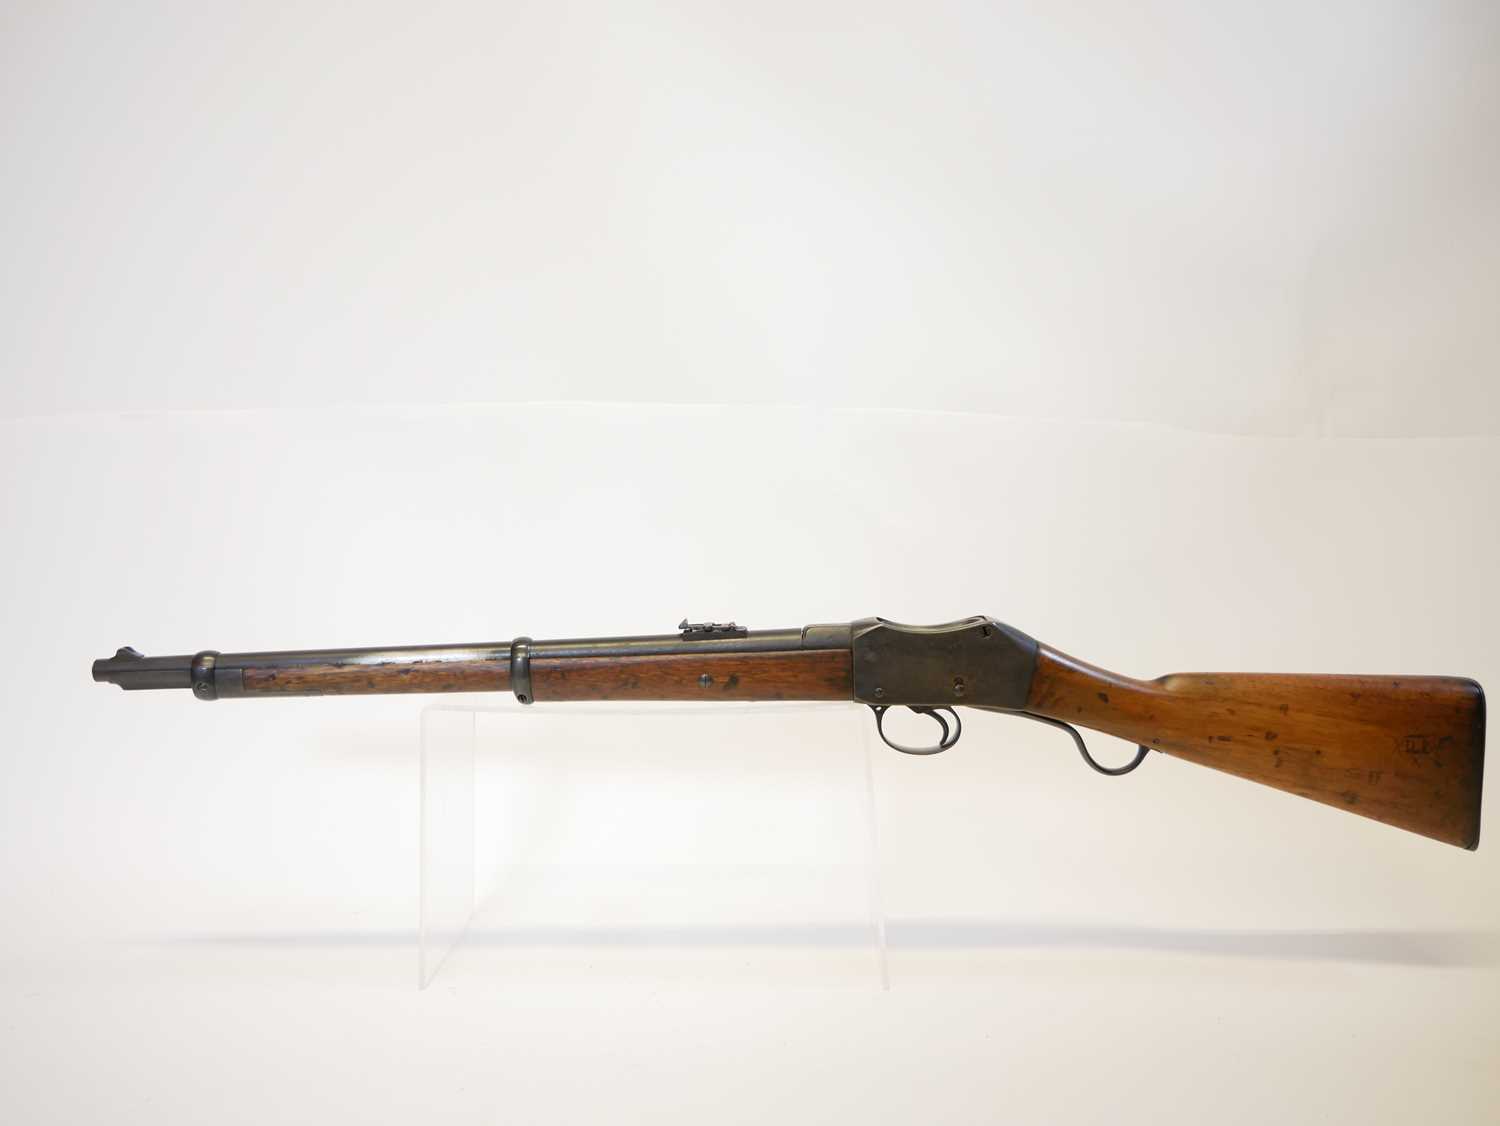 Enfield Martini Henry 577/450 Cavalry Carbine IC1, with 20.5 inch barrel (saw cut to the breech) - Image 17 of 18